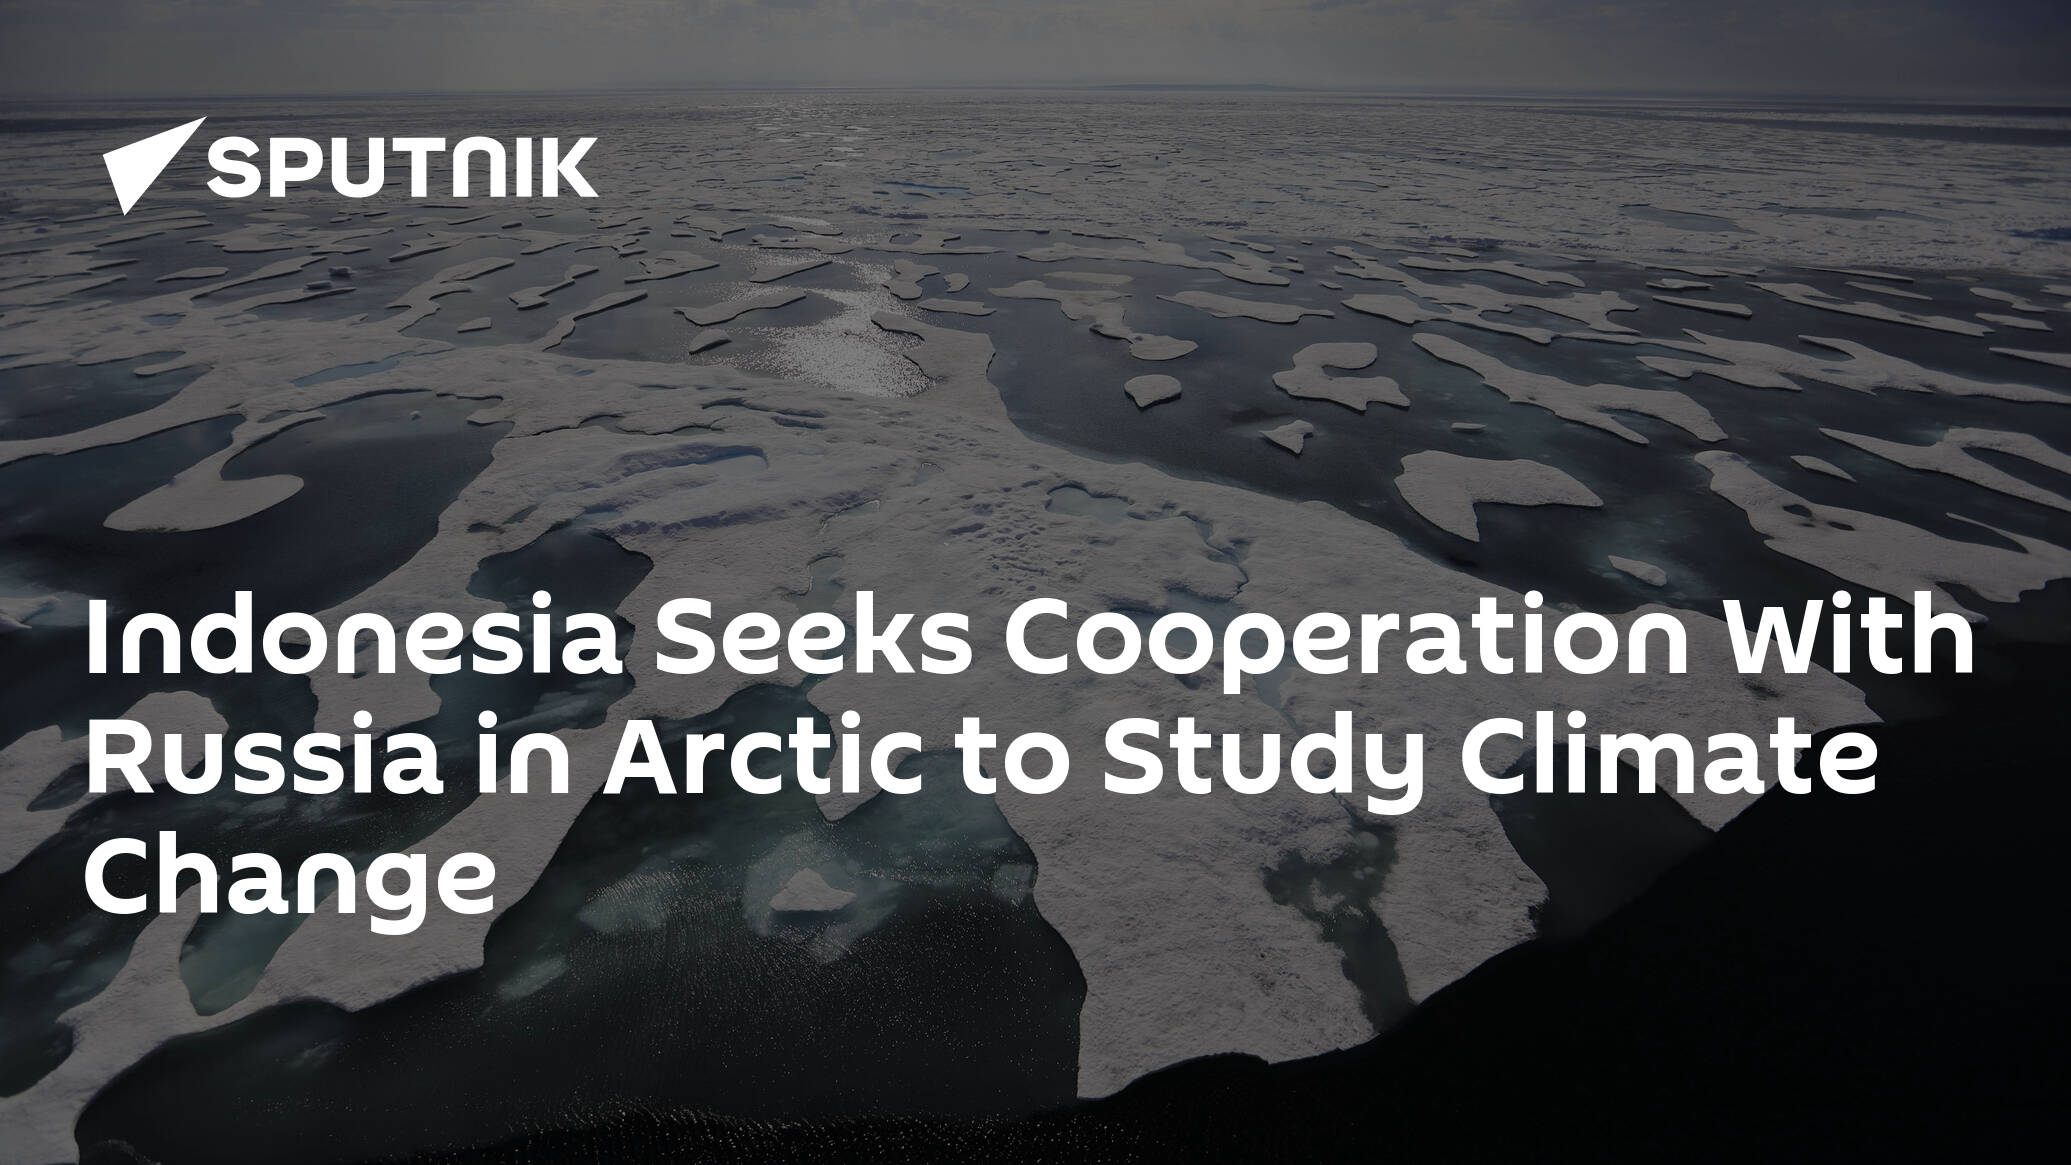 Indonesia Seeks Cooperation With Russia in Arctic to Study Climate Change